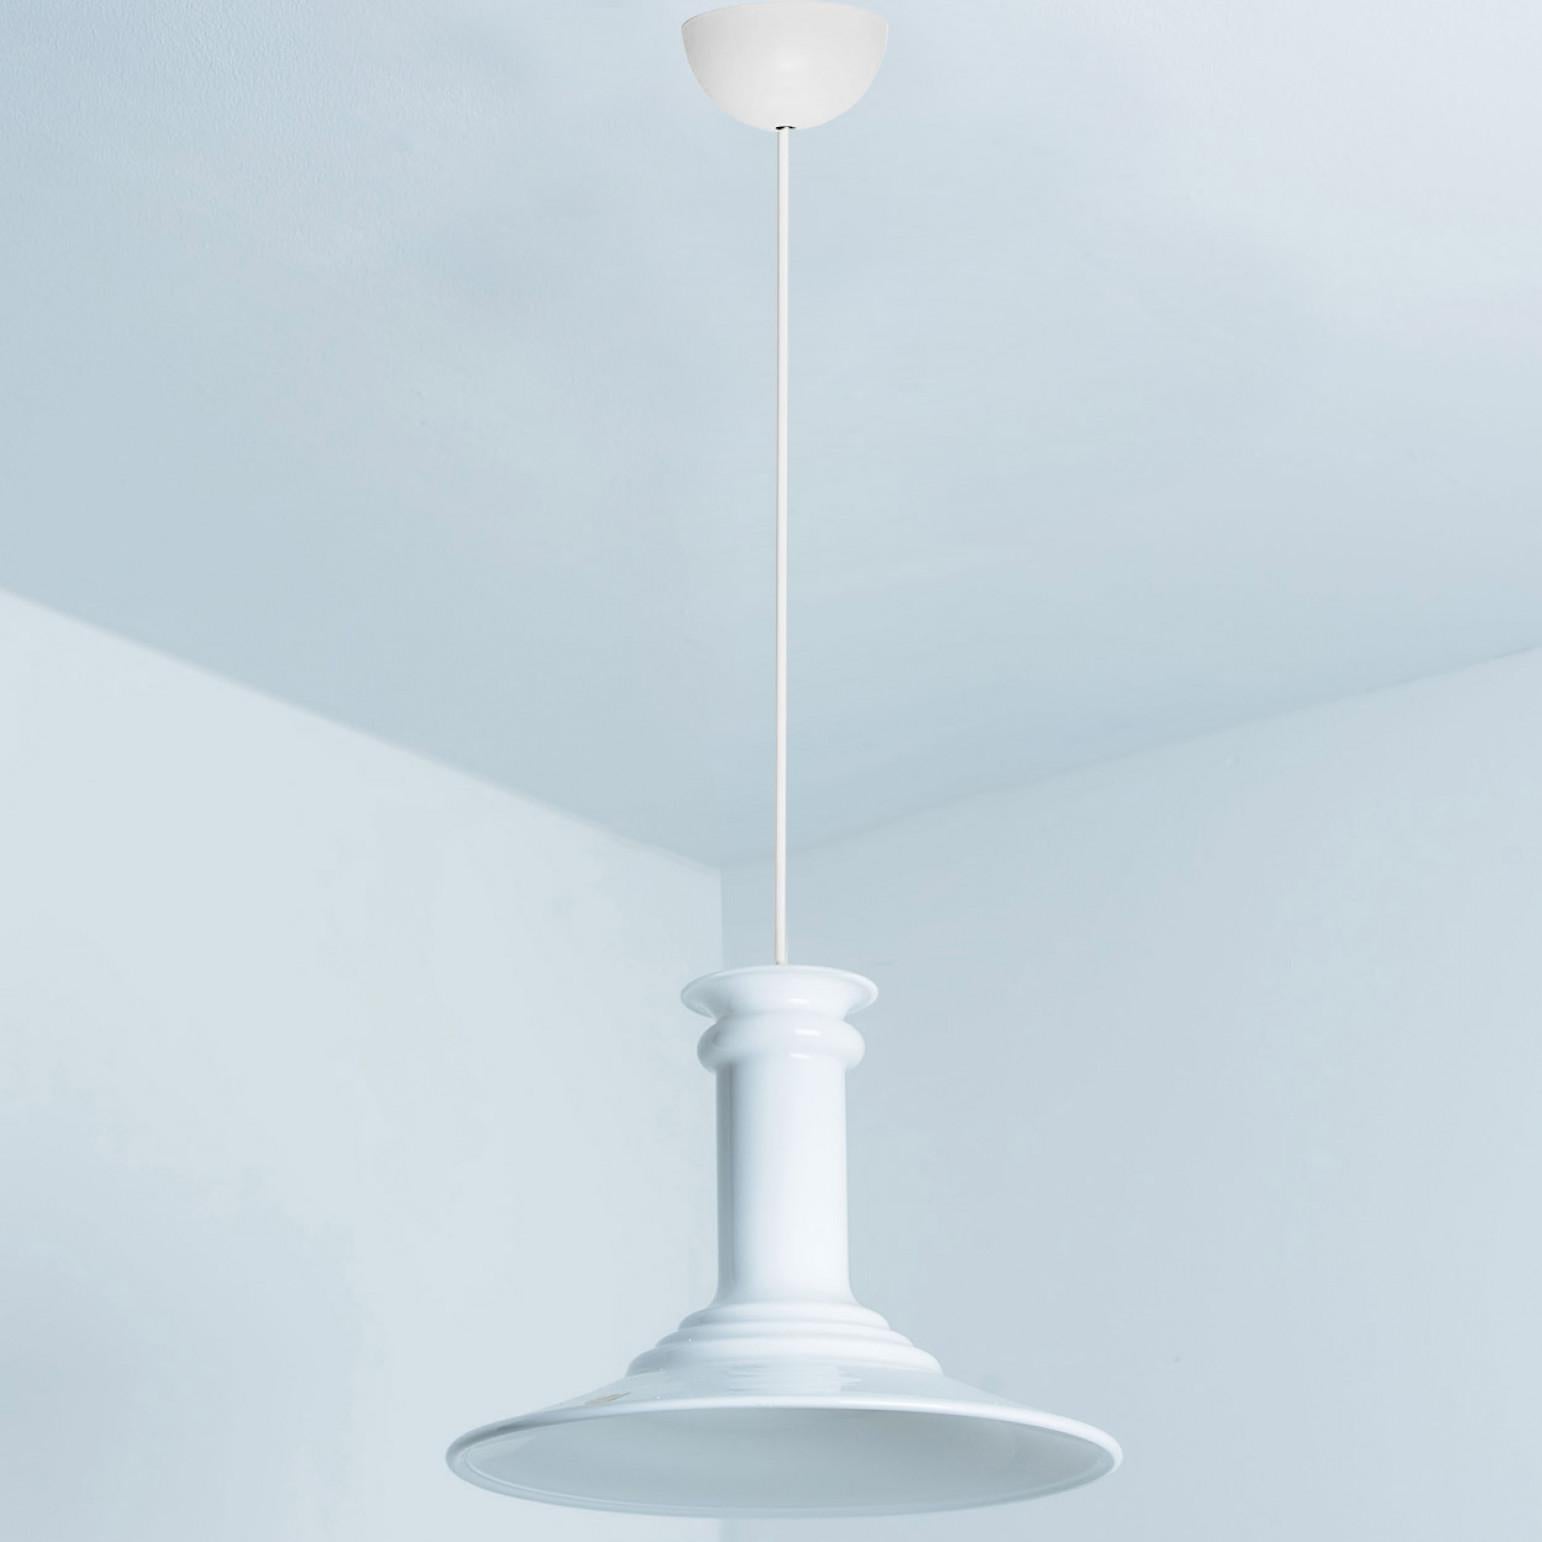 This pair of beautiful glass lamps from the Danish brand Holmegaard has a beautiful white color. The design is by Michael Bang, a designer whose work is highly sought after by collectors of the brand today. Model Etude, an acceptional form! A